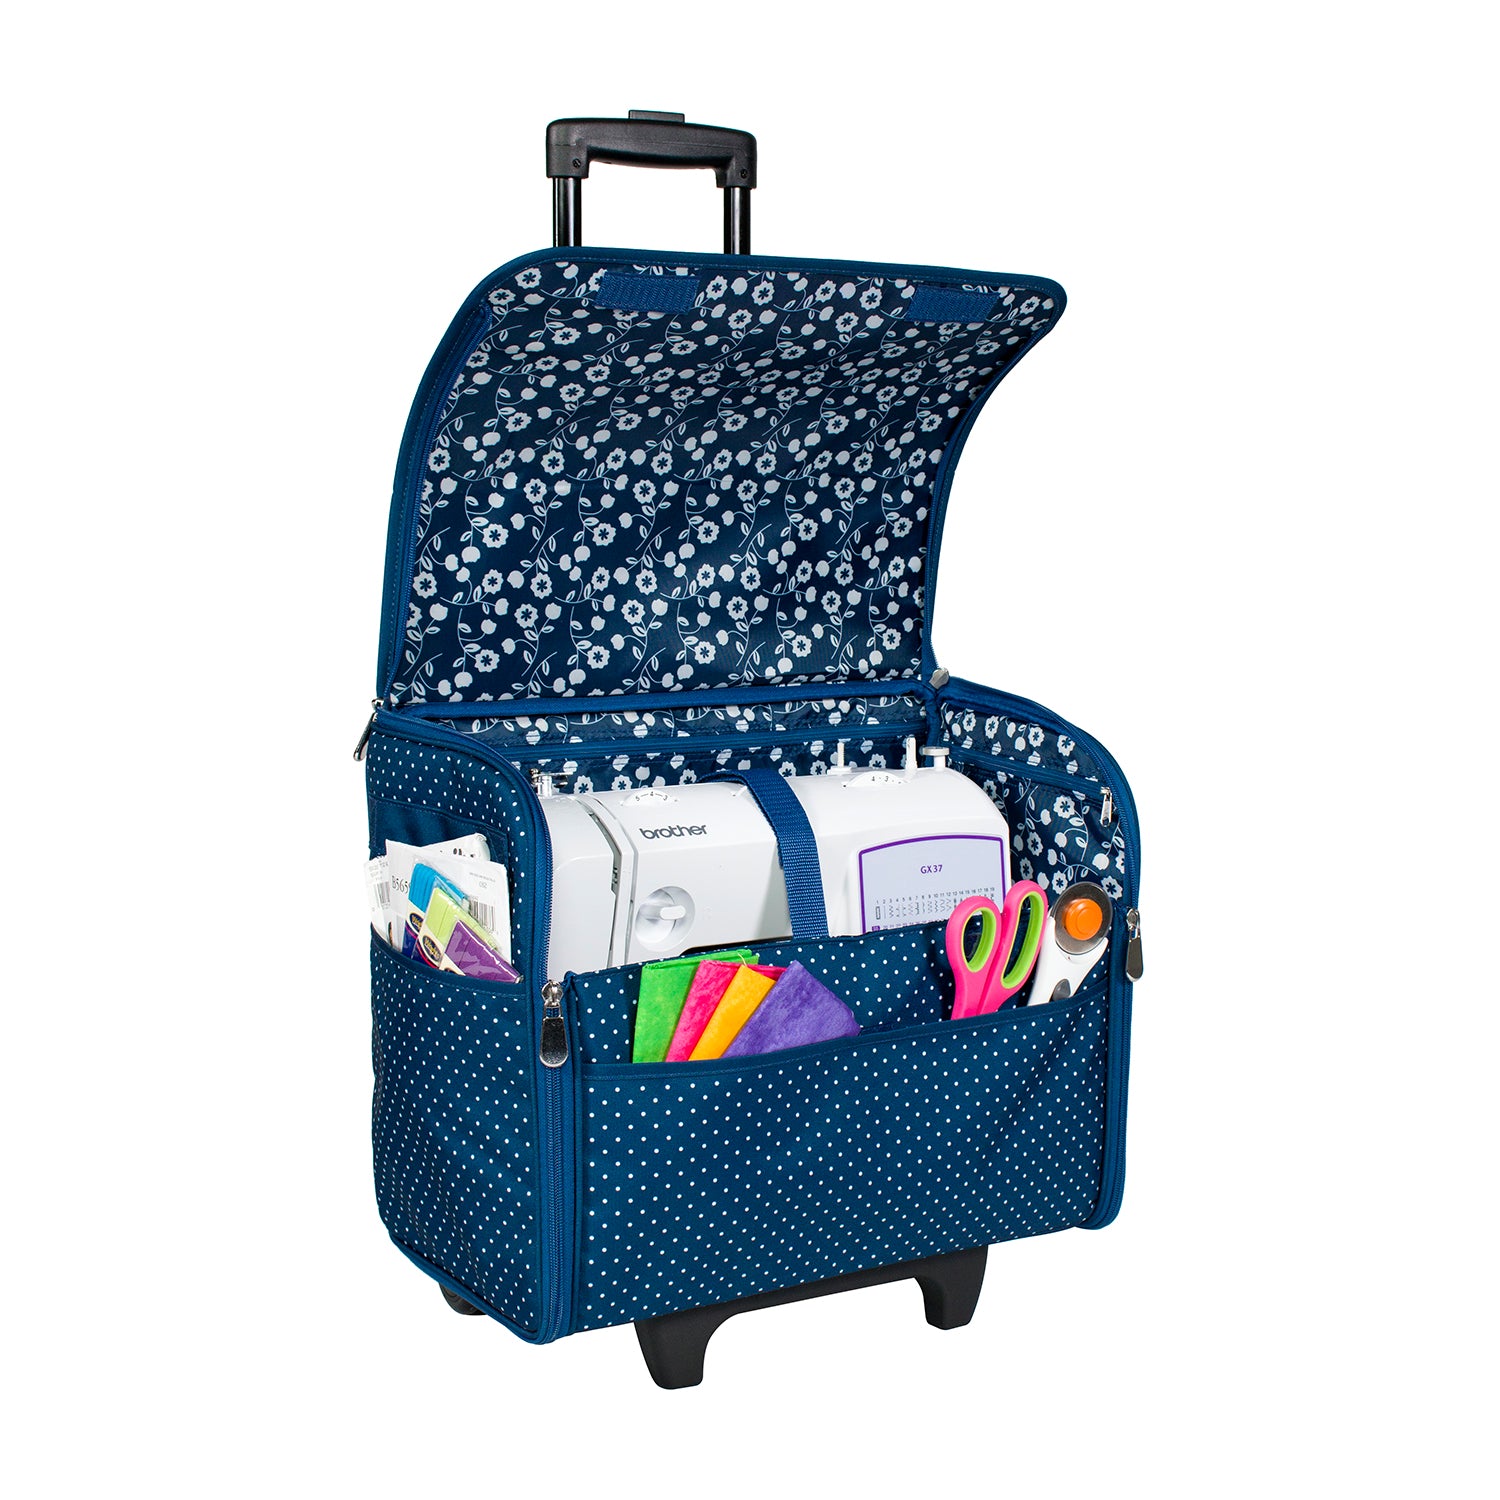 Collapsible Rolling Sewing Machine Case, Blue - Everything Mary